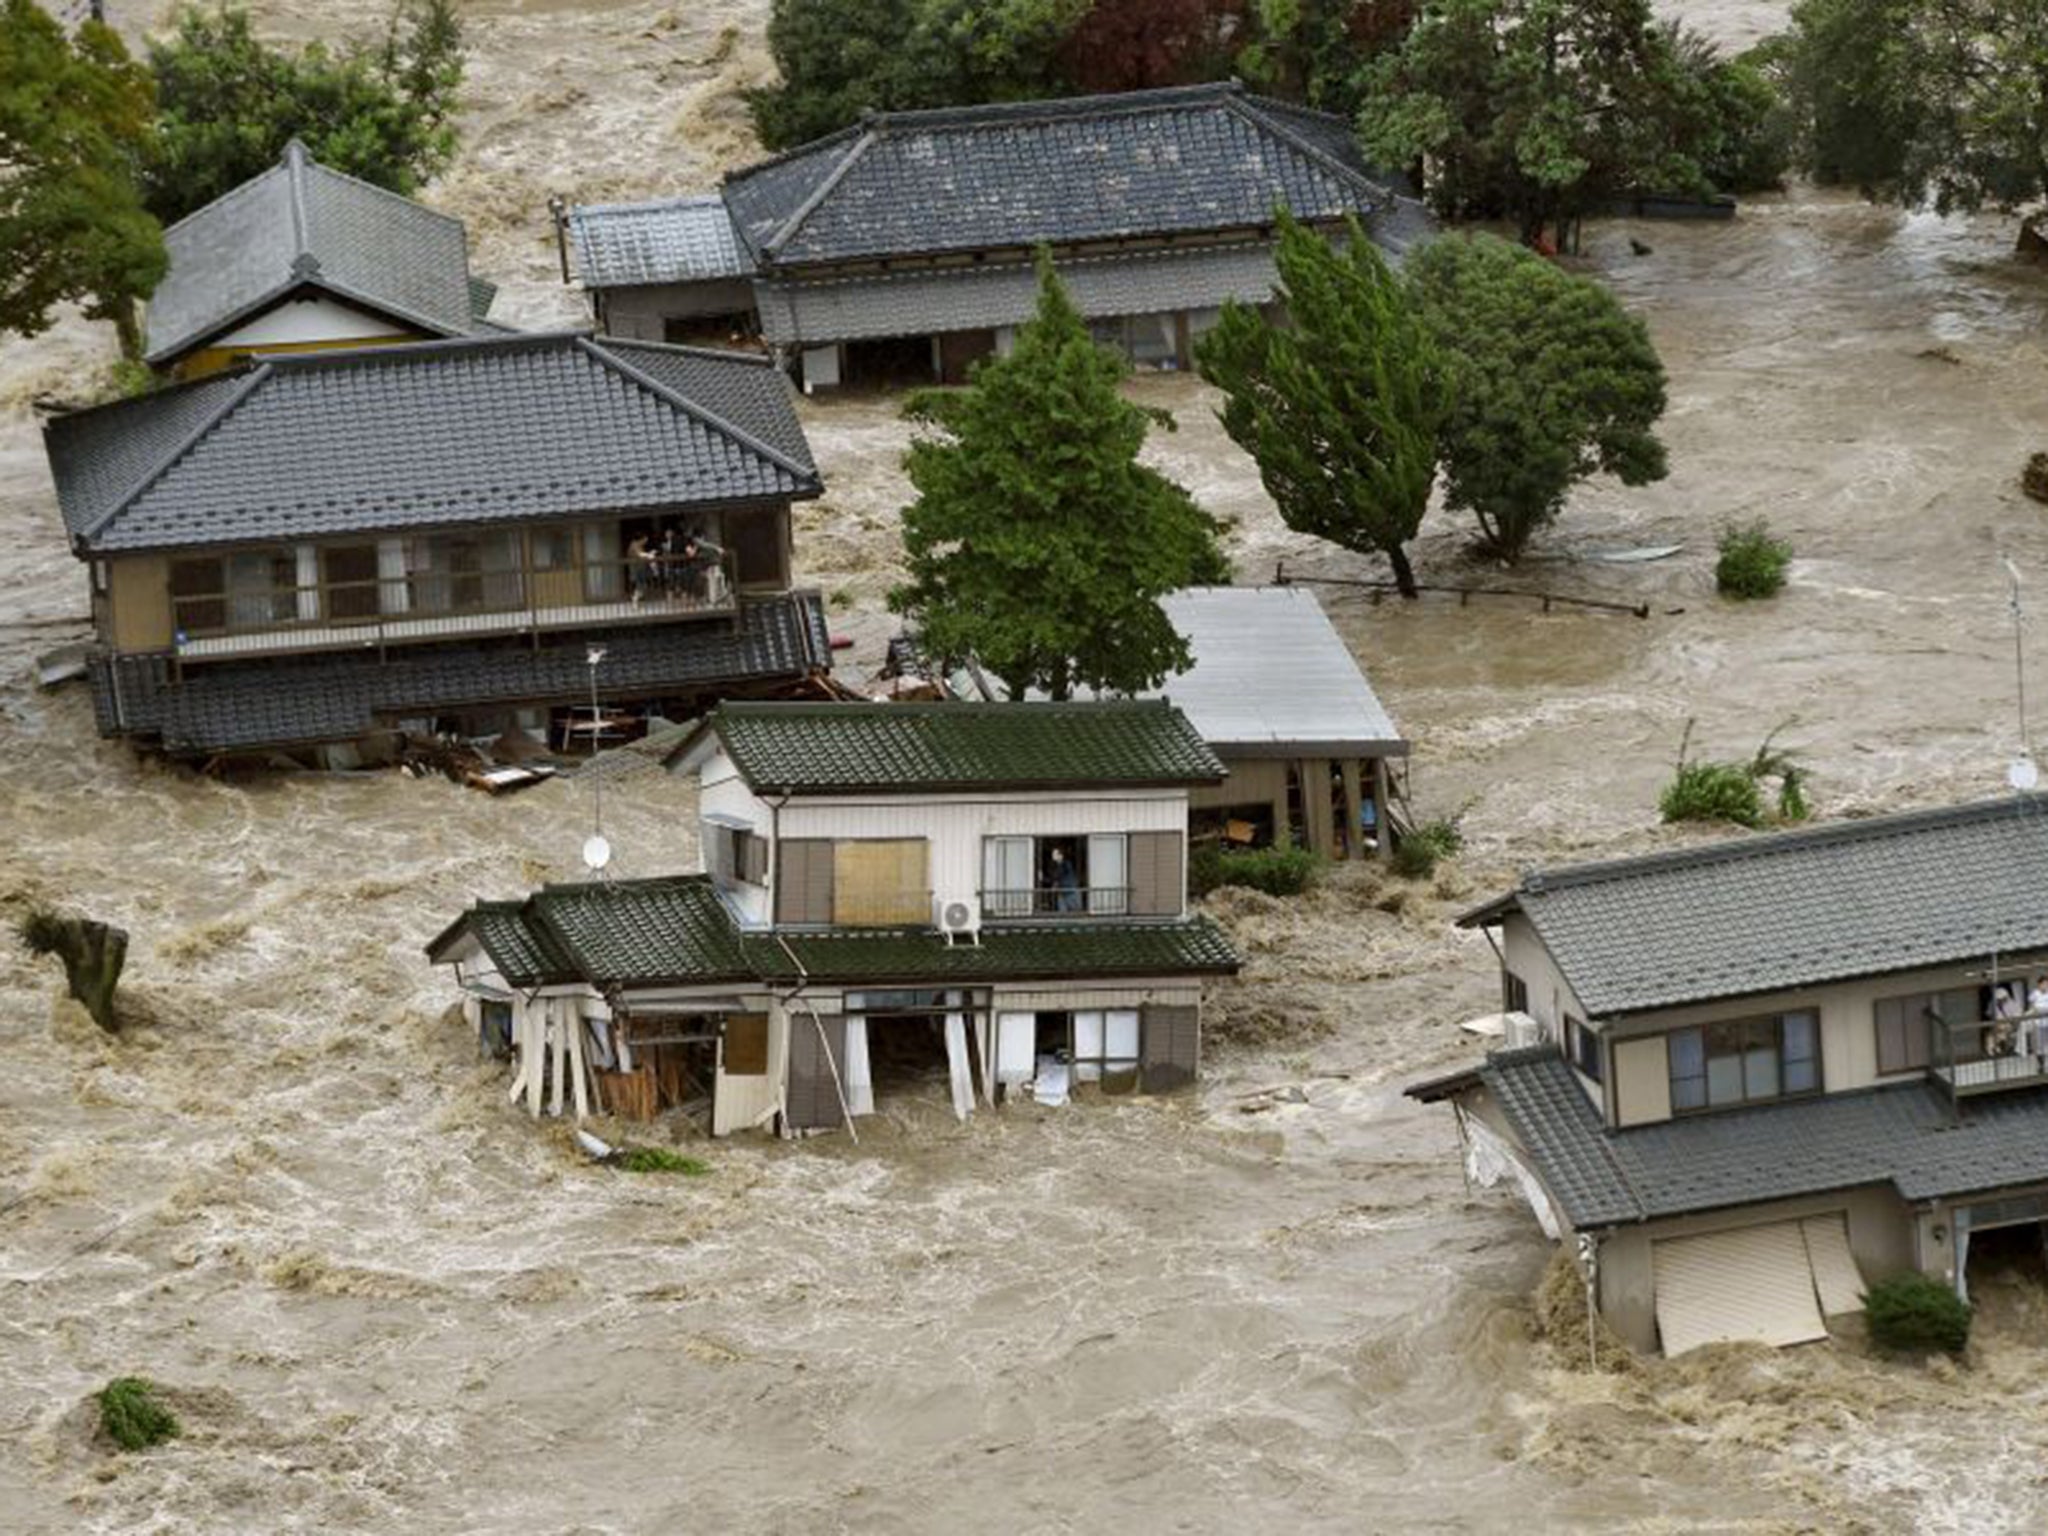 Terrified residents wait for evacuation by helicopter as the overflowing Kinugawa River rages through Joso, Ibaraki prefecture; 90,000 people were forced to flee their homes